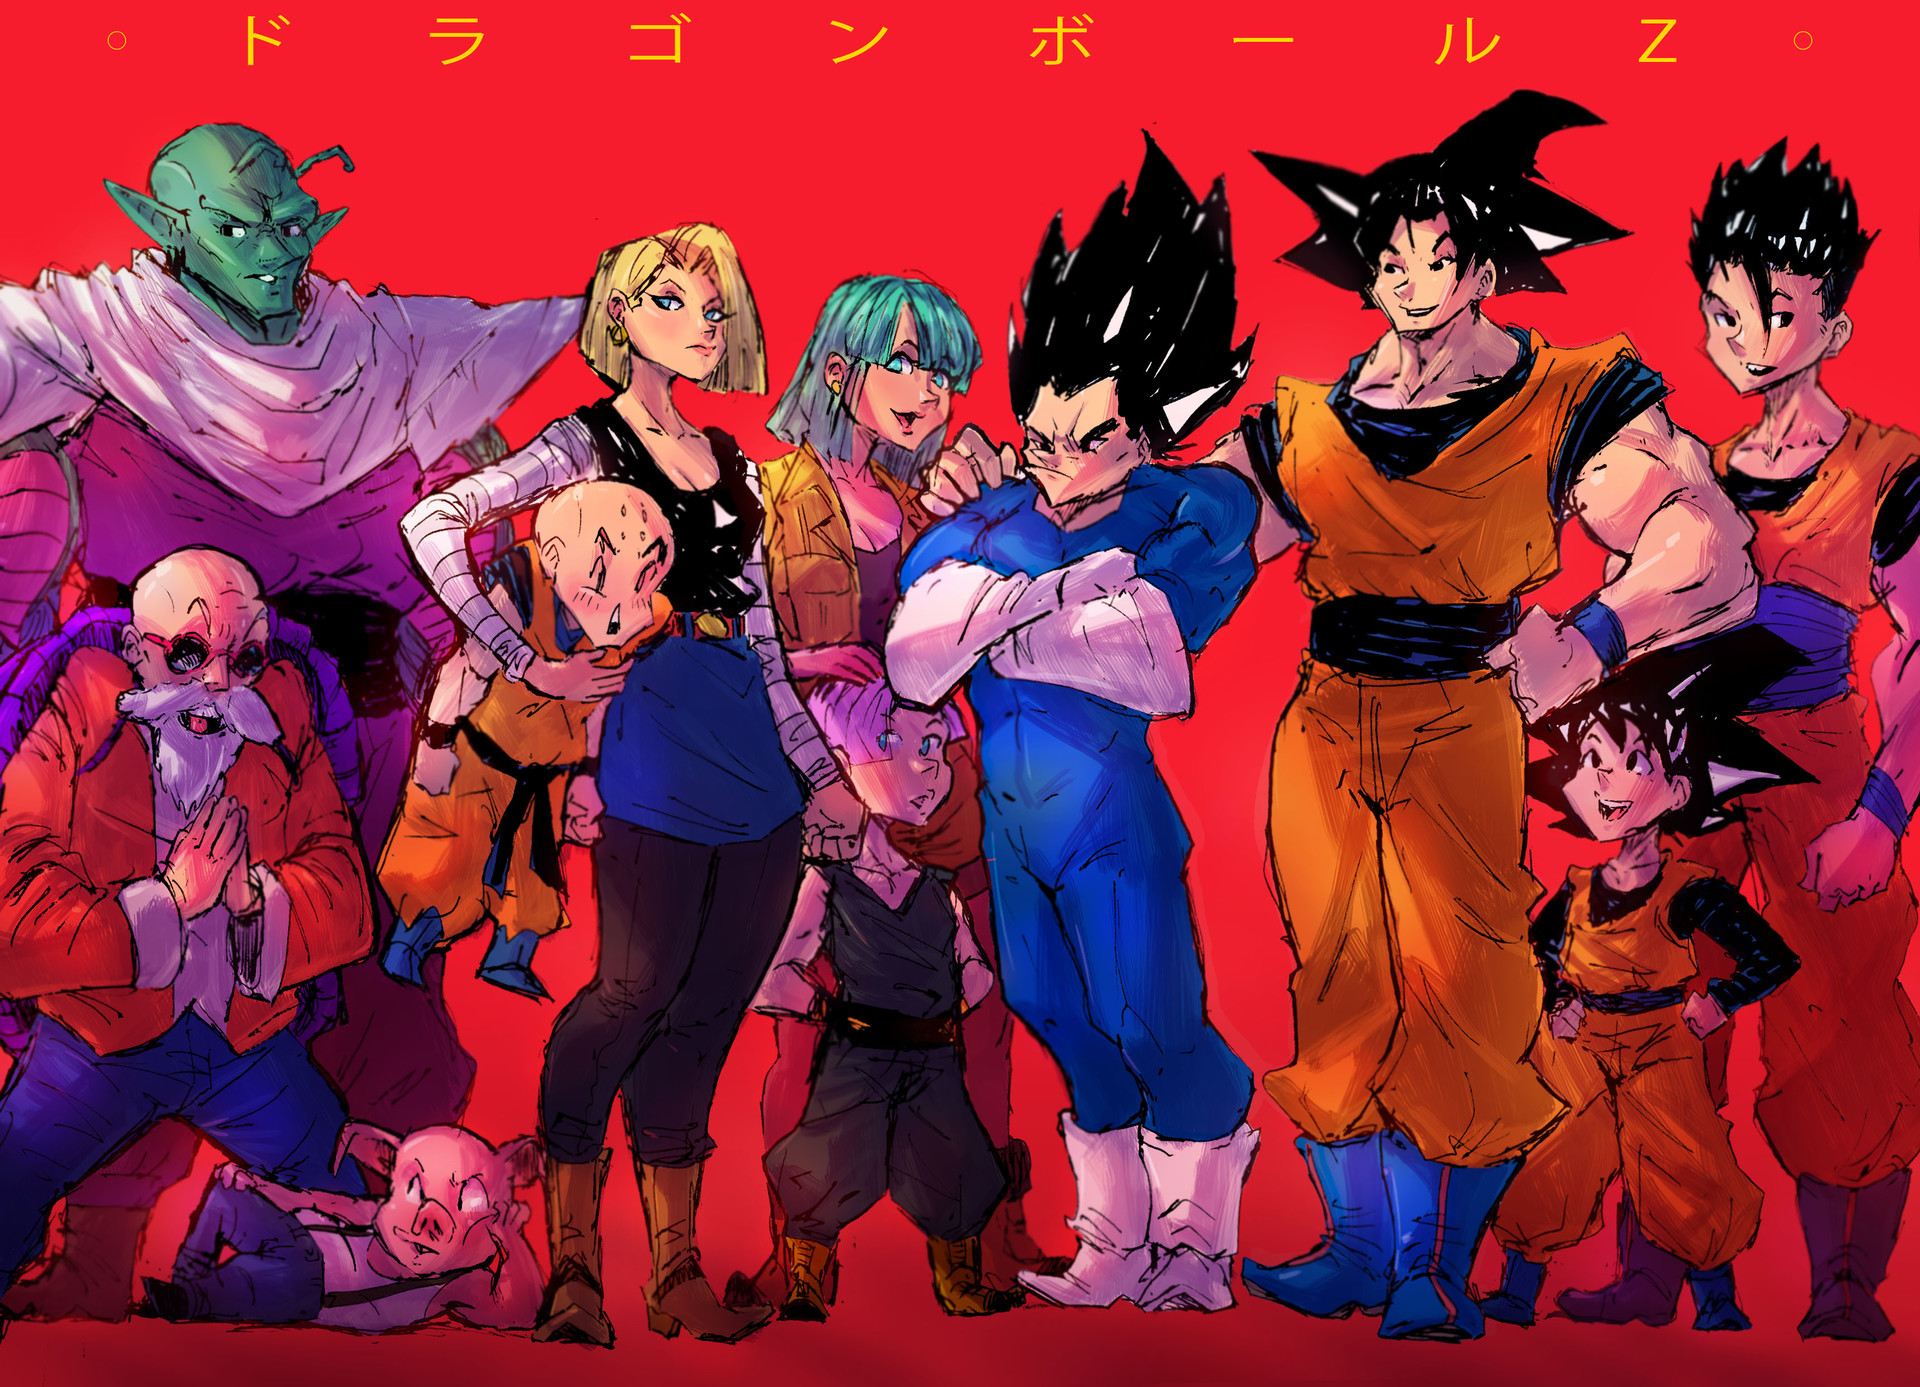 Dragon Ball Z Characters [3840x2160] : r/wallpapers